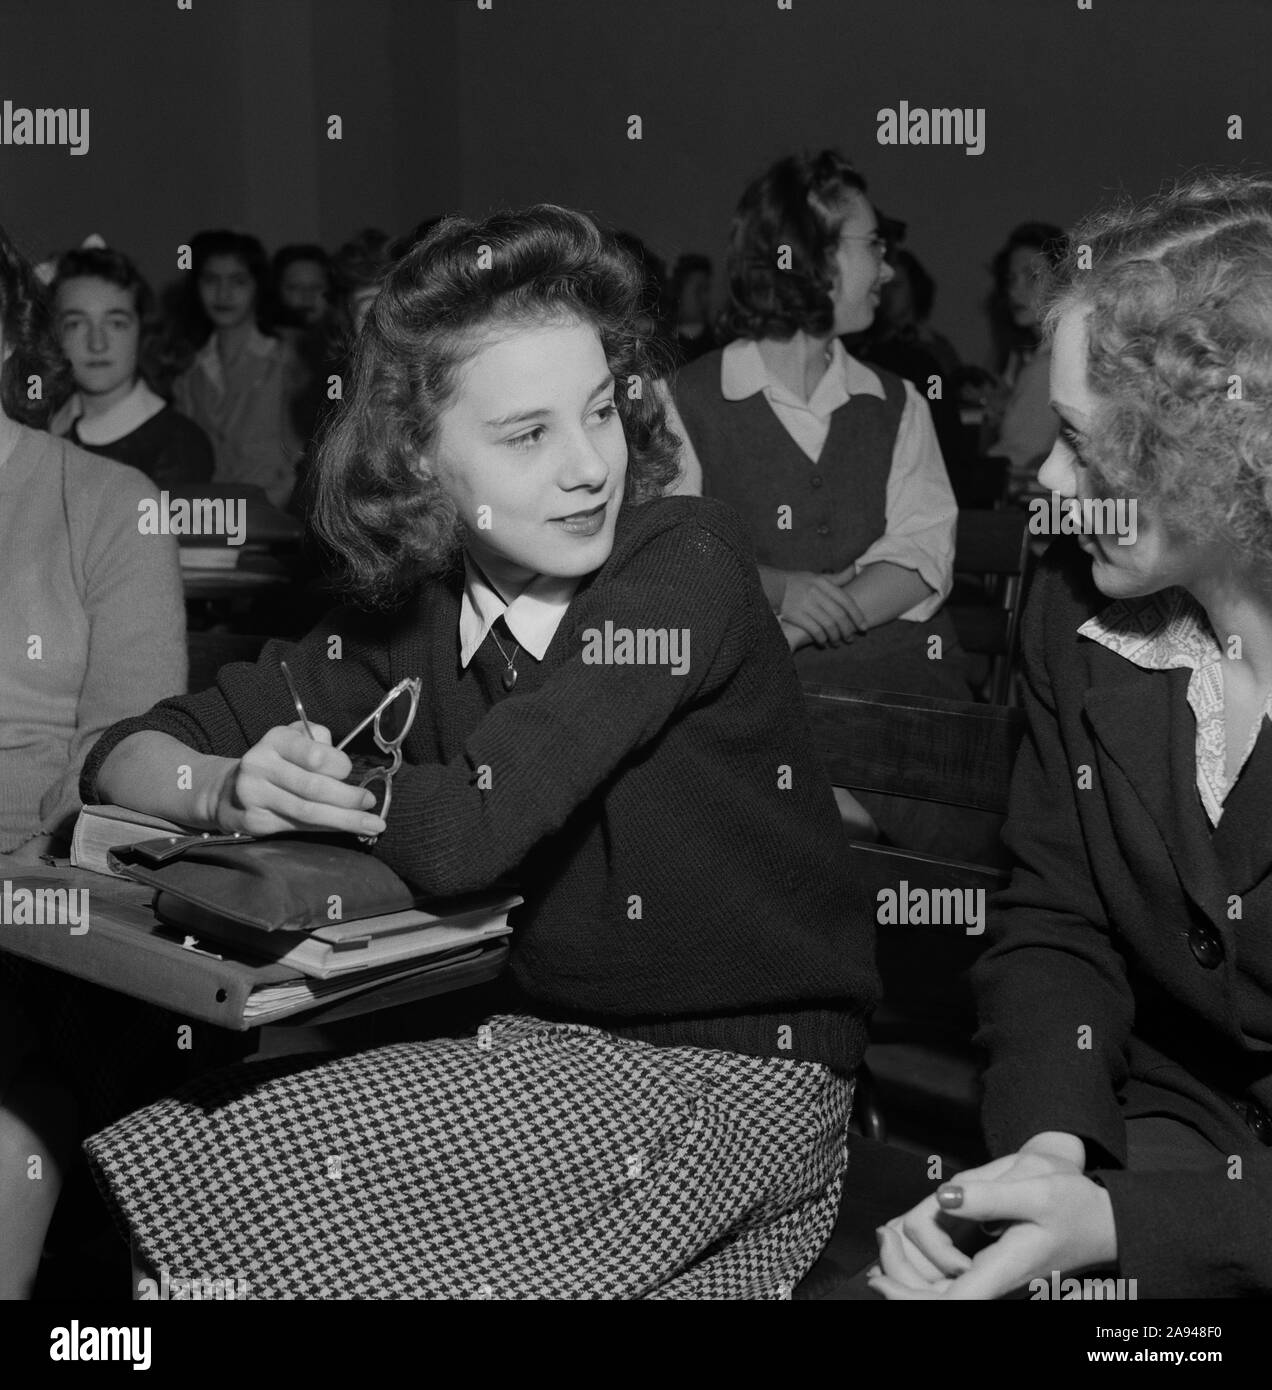 Female Students in Classroom Woodrow Wilson High School, Washington, D.C., USA, Esther Bubley for U.S. Office of War Information, October 1943 Stock Photo